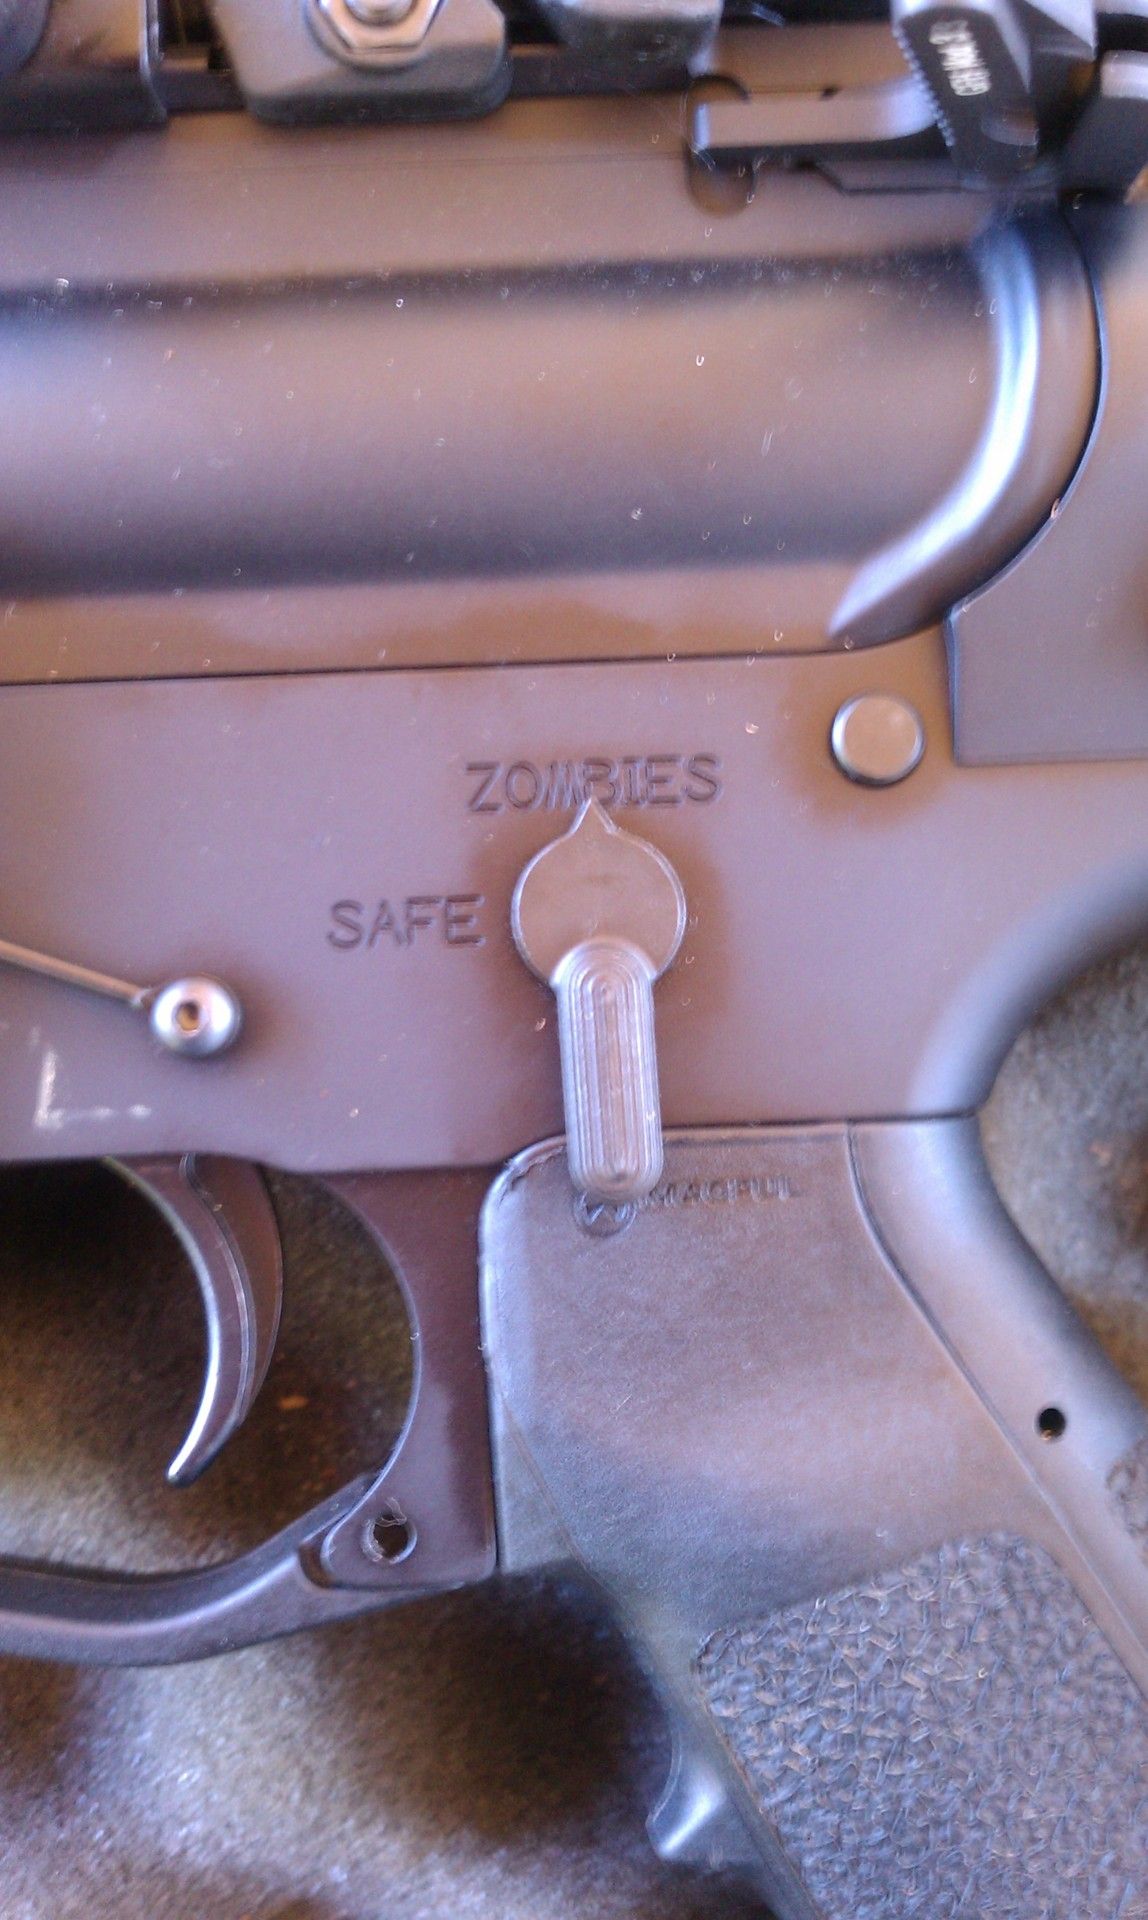 funny ar15 fire selector - Zombies Safe